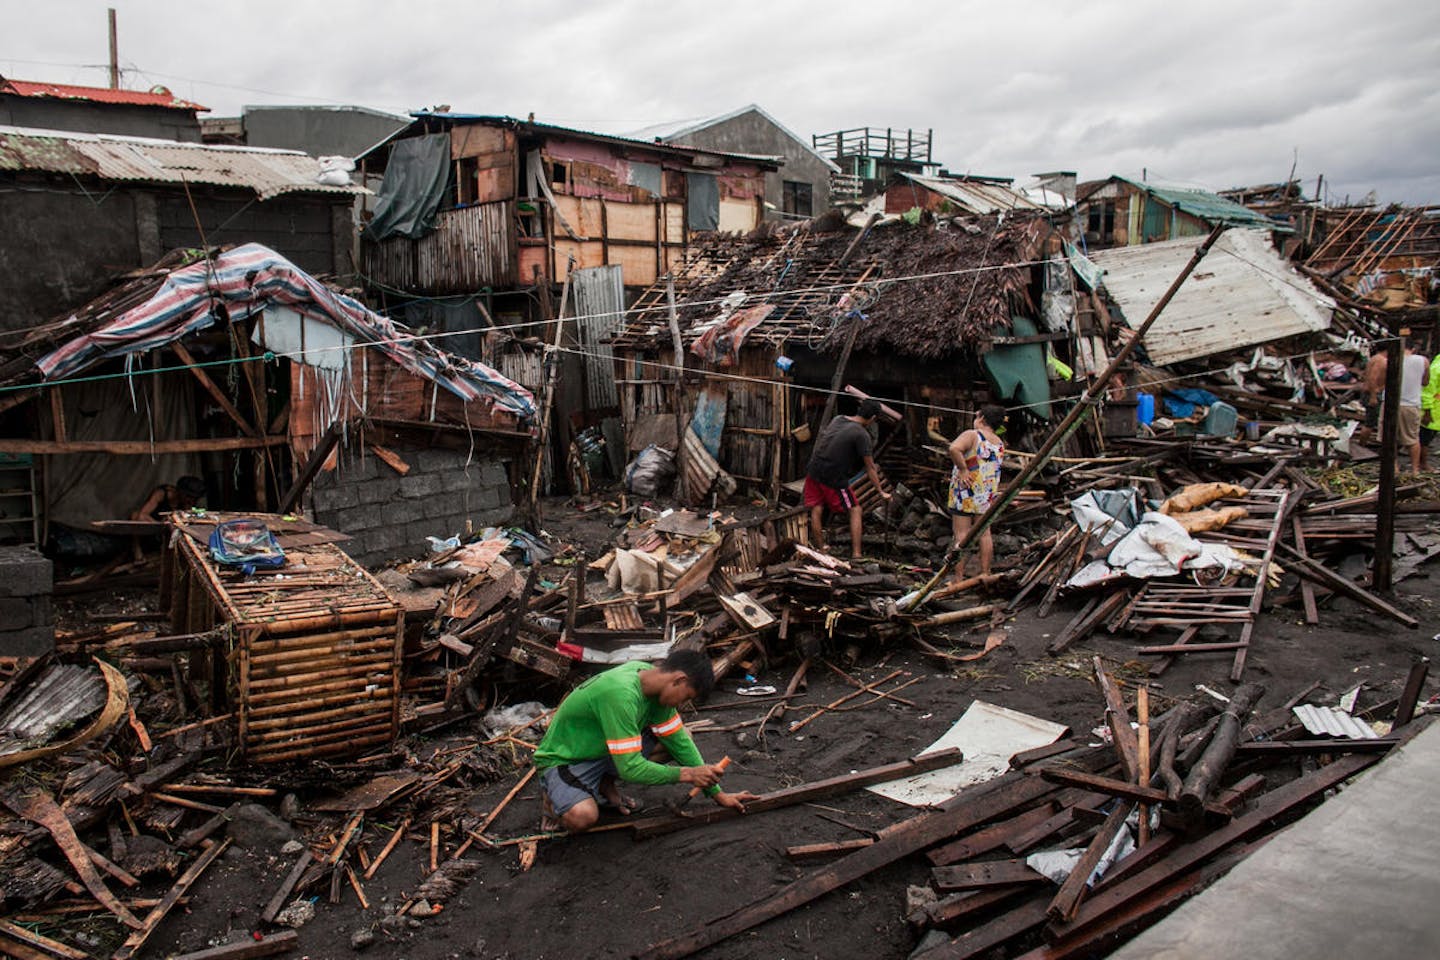 Typhoon-prone Philippines gets climate funding for early warning system | News | Eco-Business | Asia Pacific